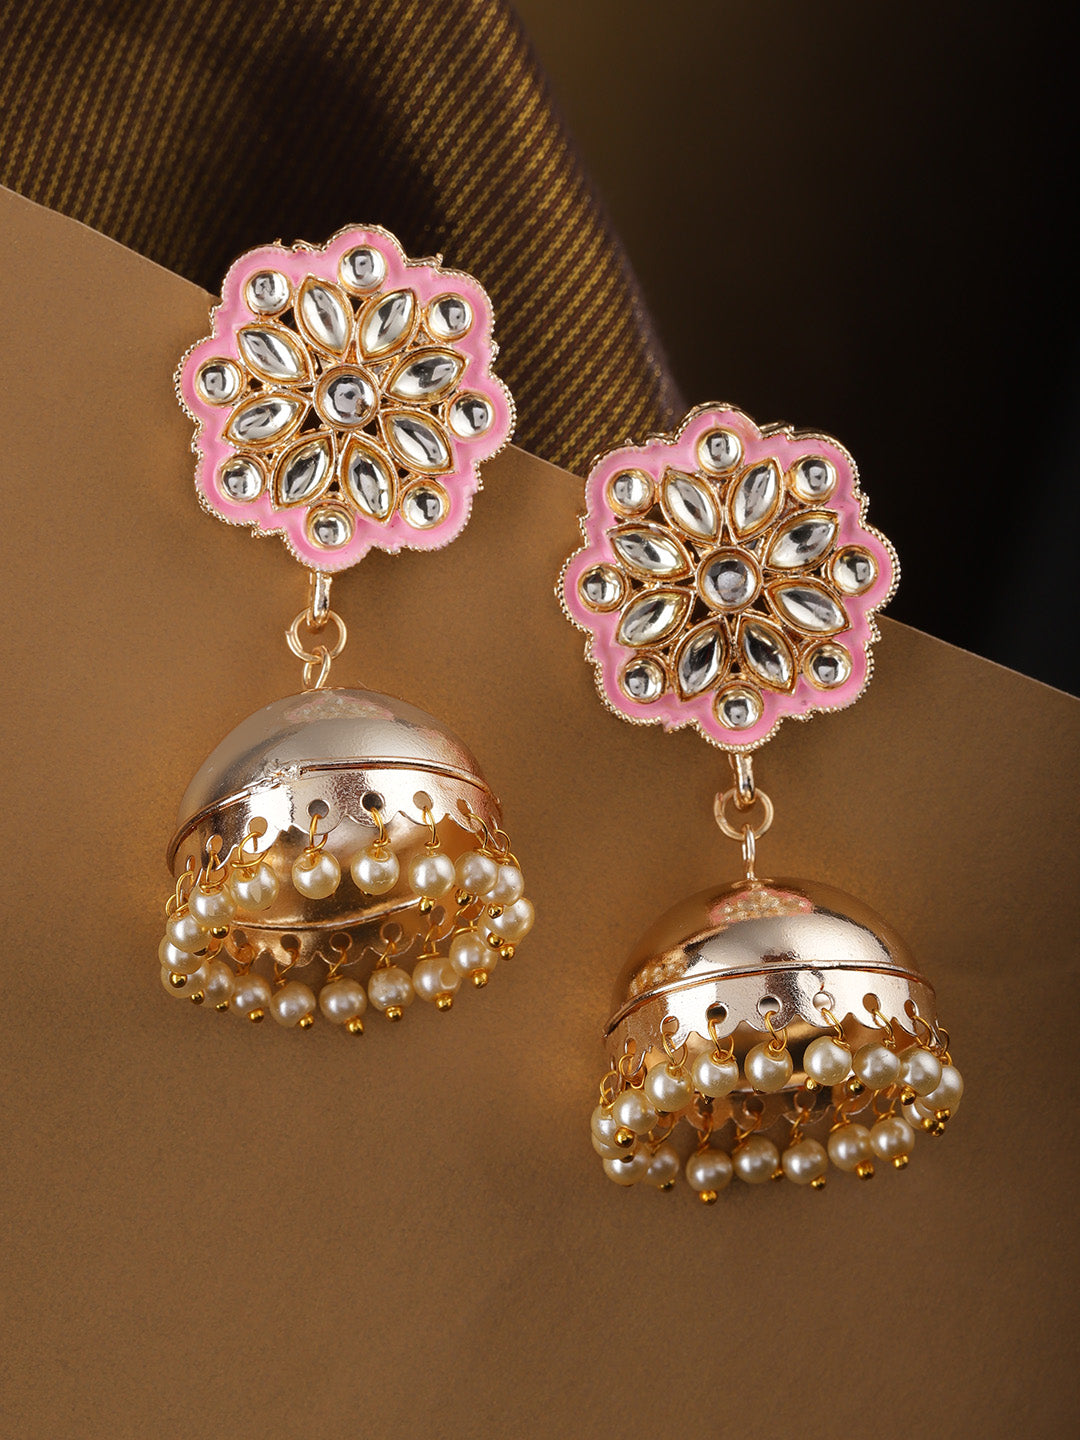 Gold-Plated Kundan Studded Floral Patterned Meenakari Jhumka Earrings in Pink Color with Pearls Drop